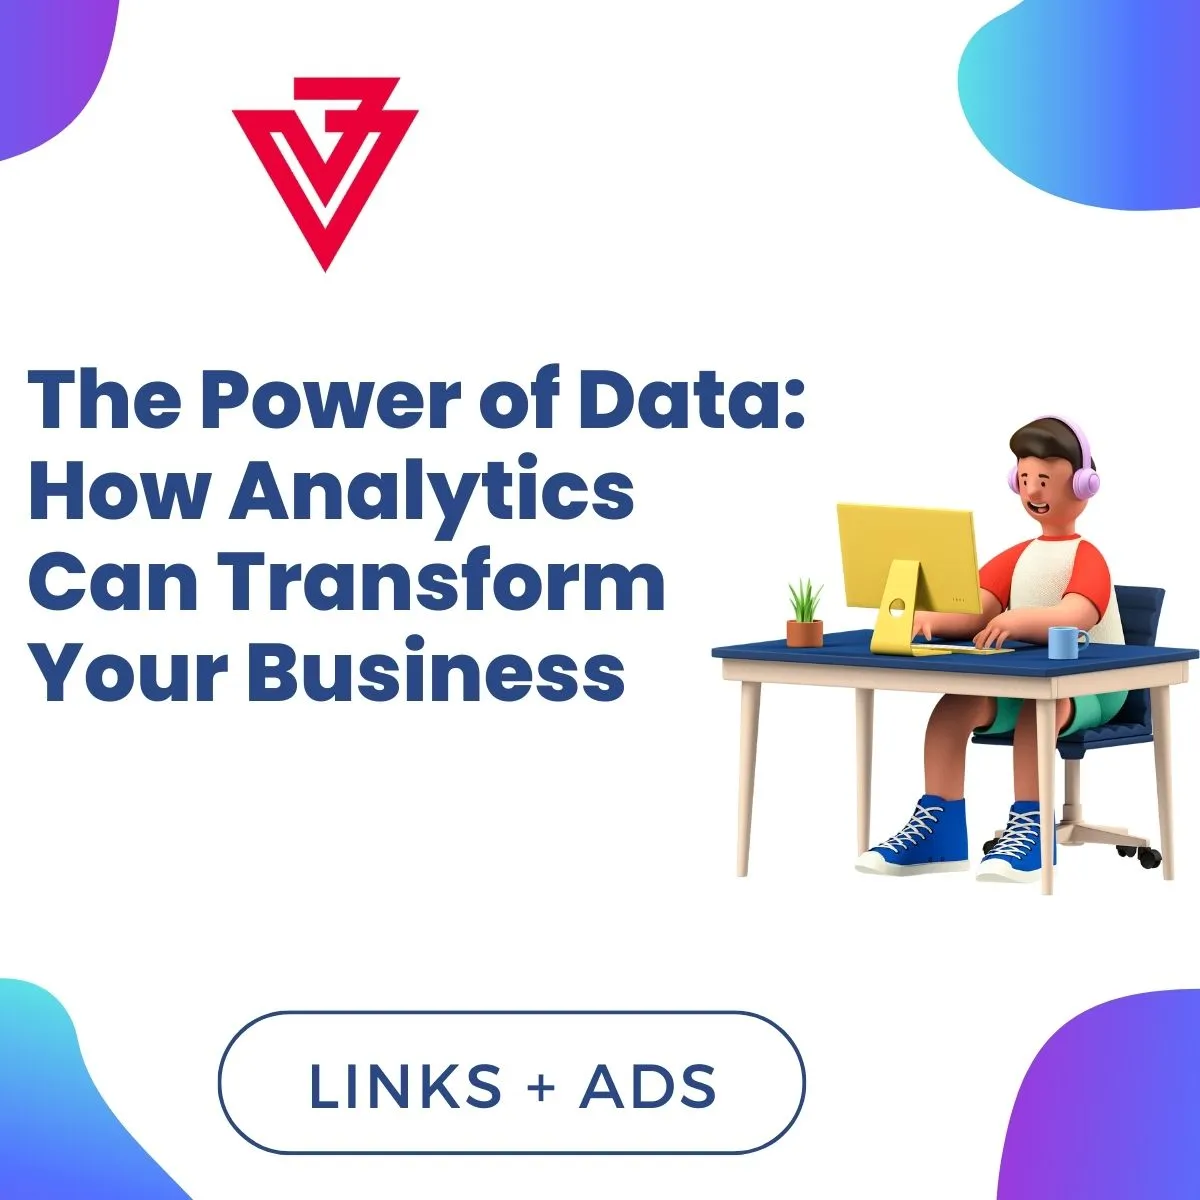 The Power of Data: How Analytics Can Transform Your Business